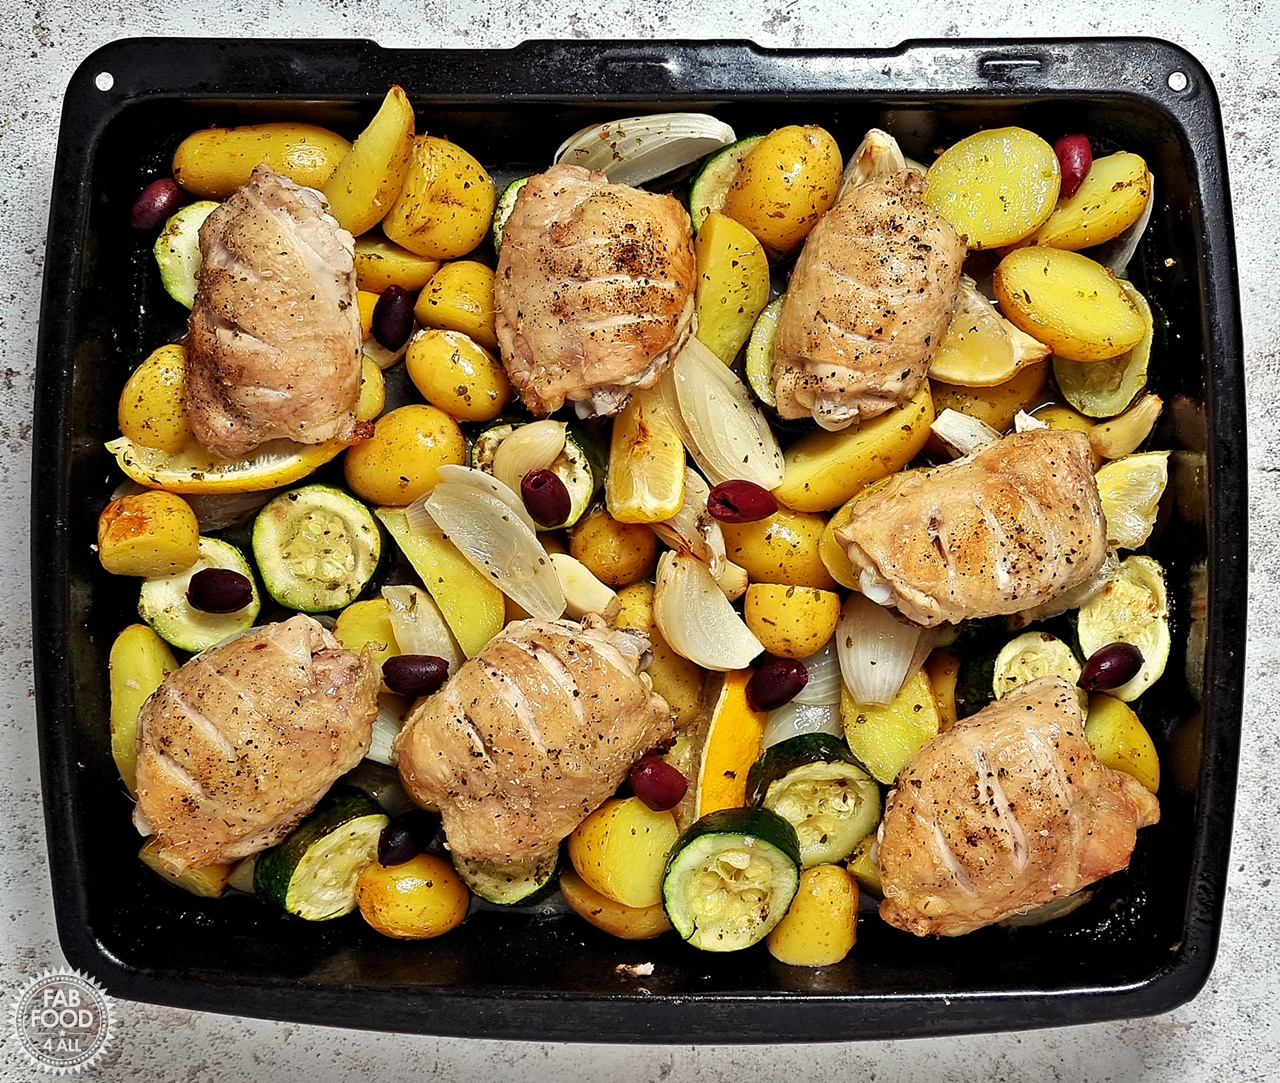 Easy Greek Chicken & Potatoes - olives added halfway through cooking.